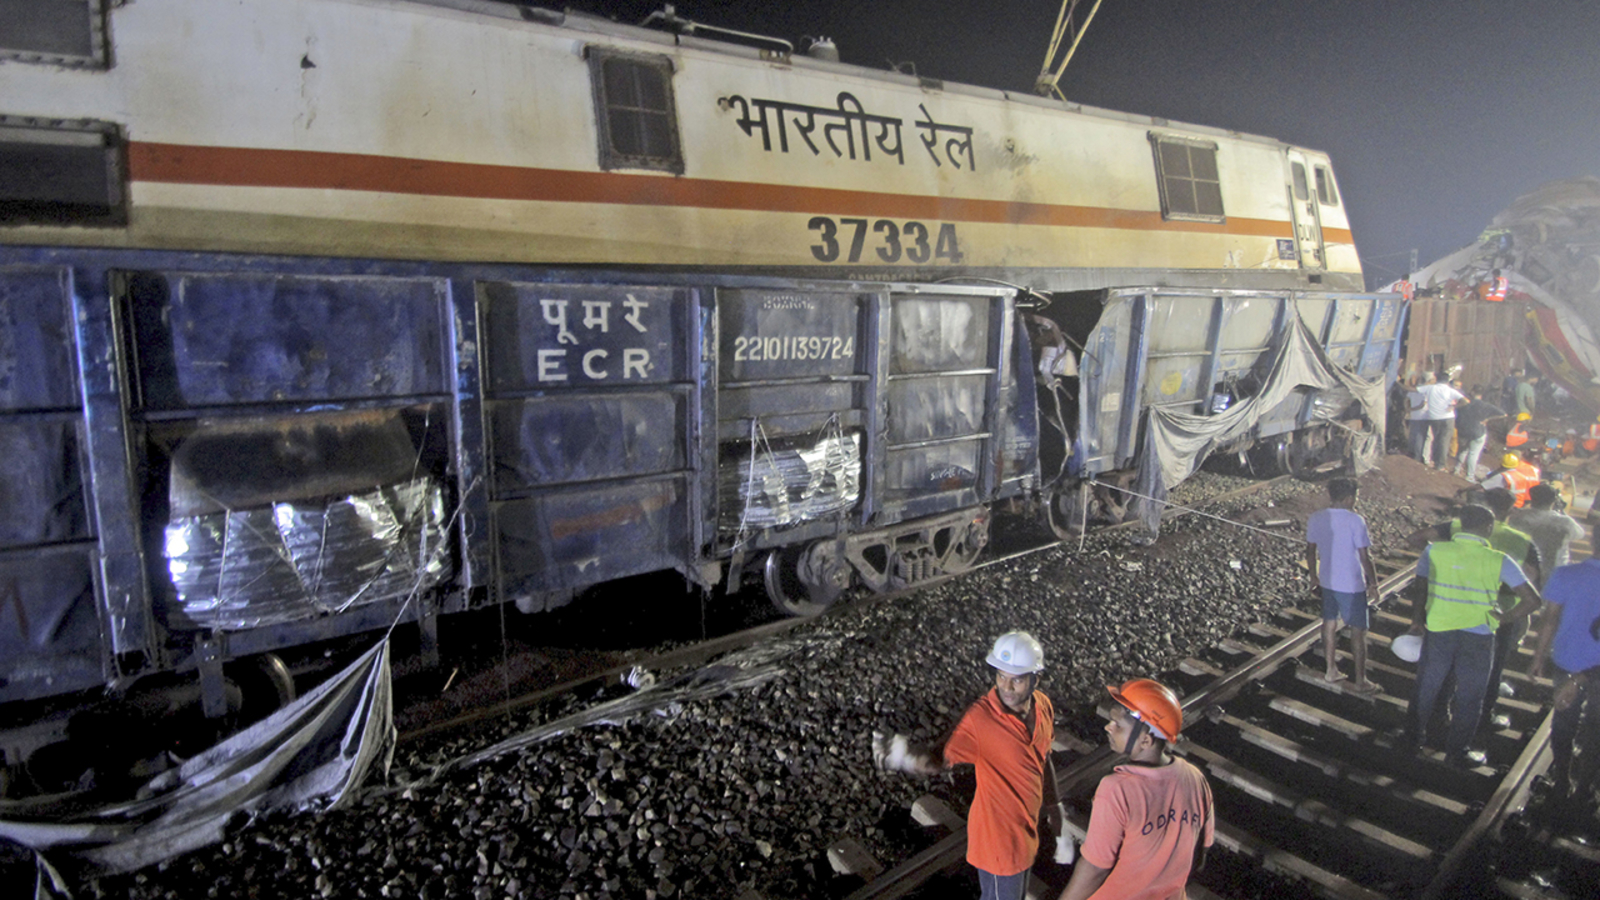 India train crash: A passenger train derails in India, killing more than 200 people, trapping many others